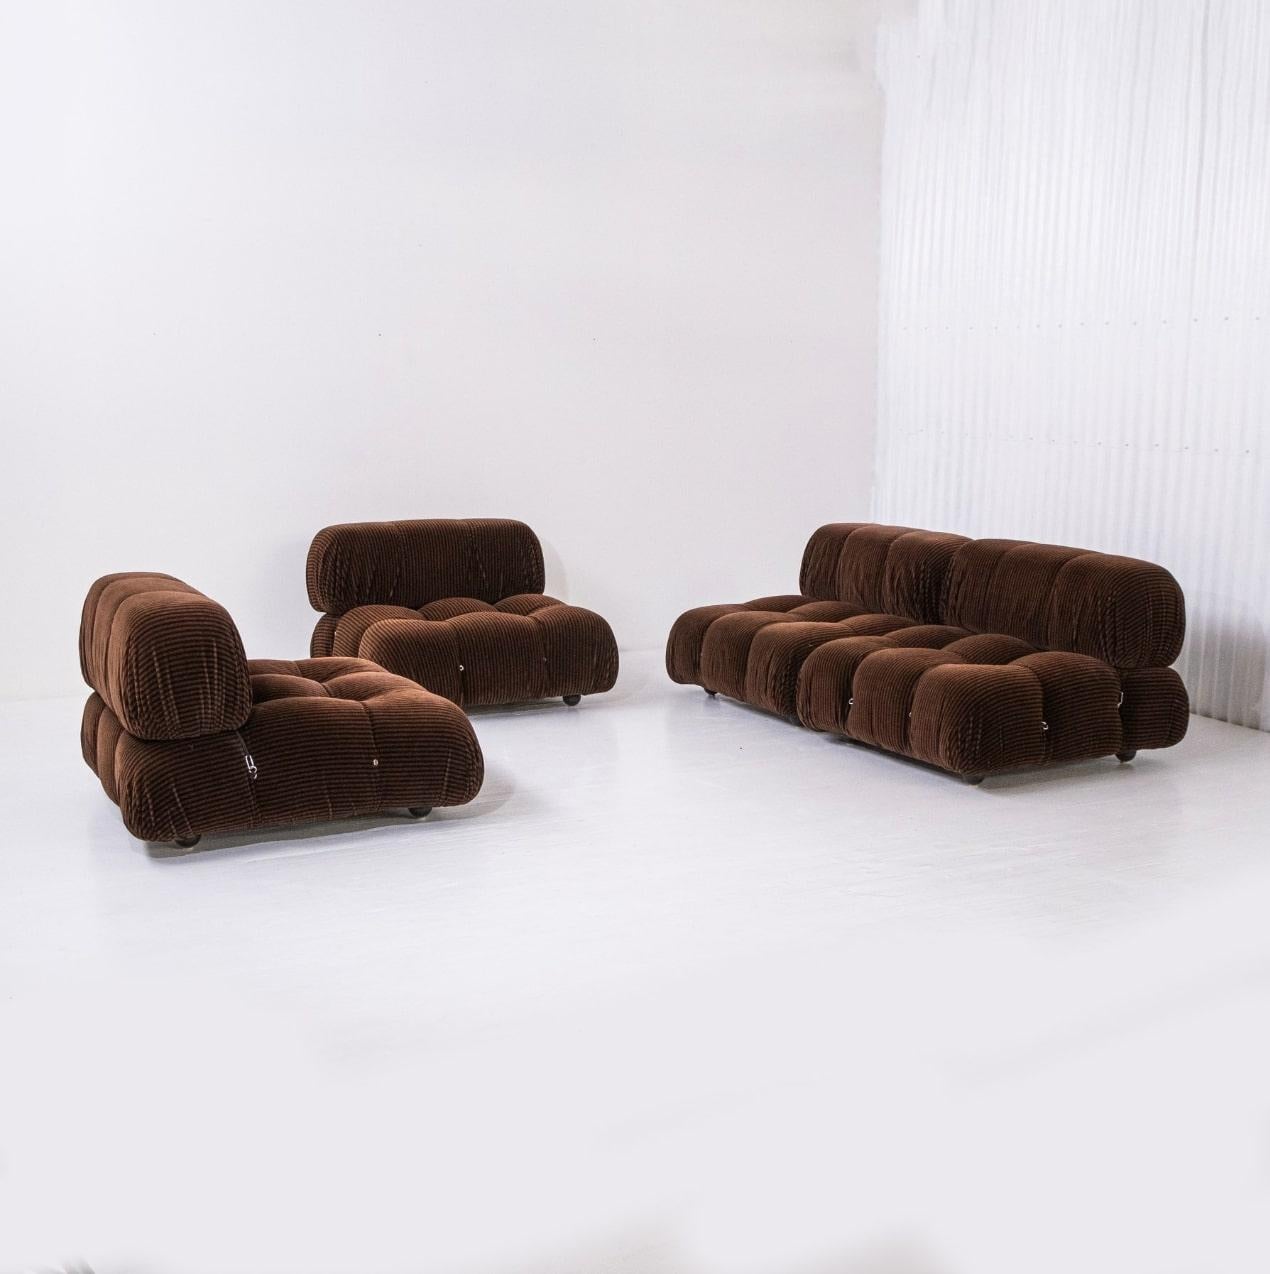 The sofa was used very little and remained perfectly packaged in a showroom for many years.
The modules are all covered with the original brown velvet and are in good used condition. Structure and padding are intact, solid and functional.
The